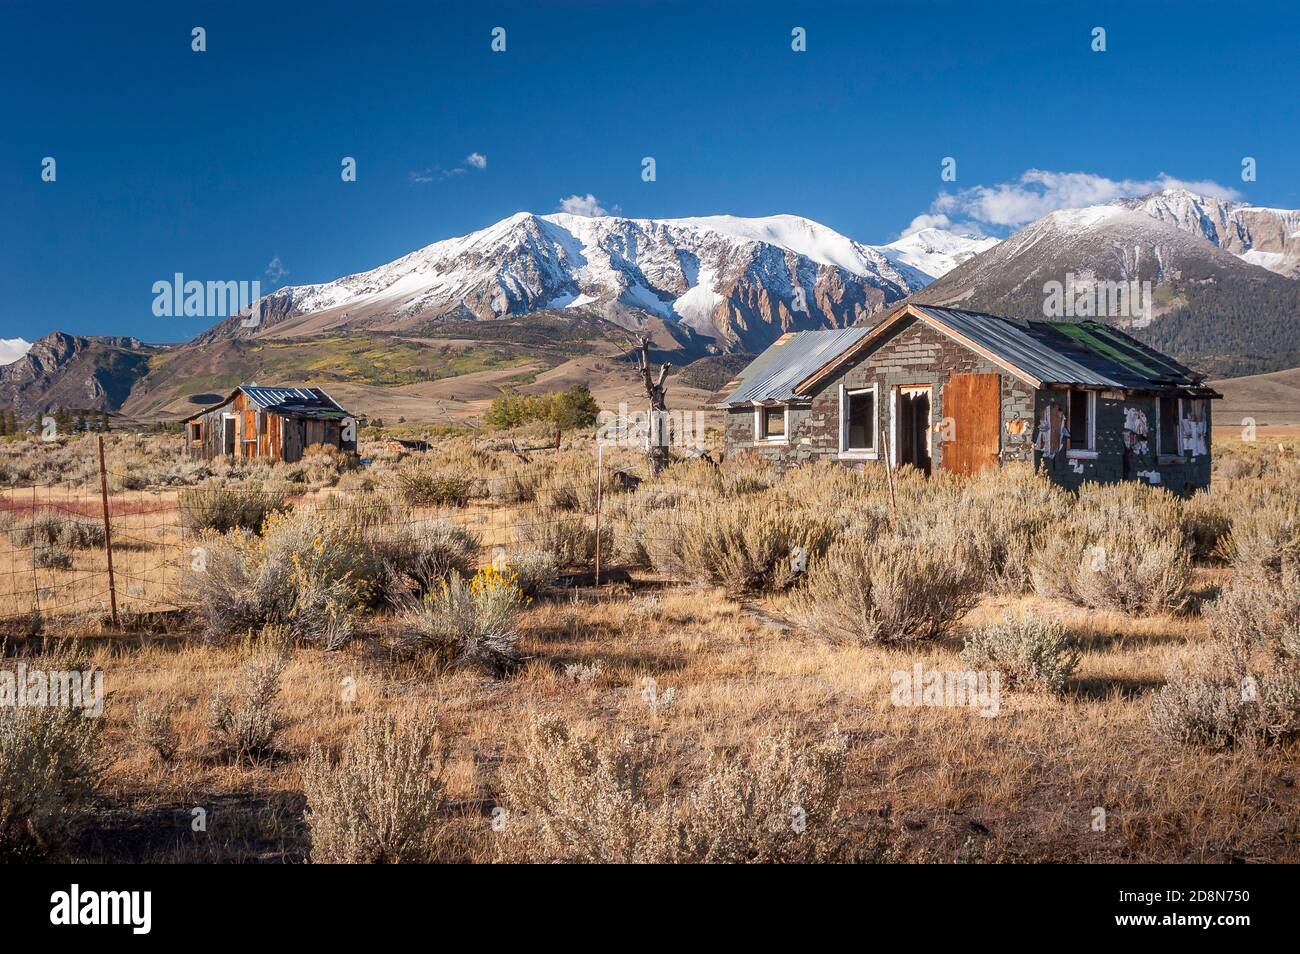 An abandoned homesite in the Owens Valley of California with the snow covered Sierra Nevada mountain range in the background. Stock Photo